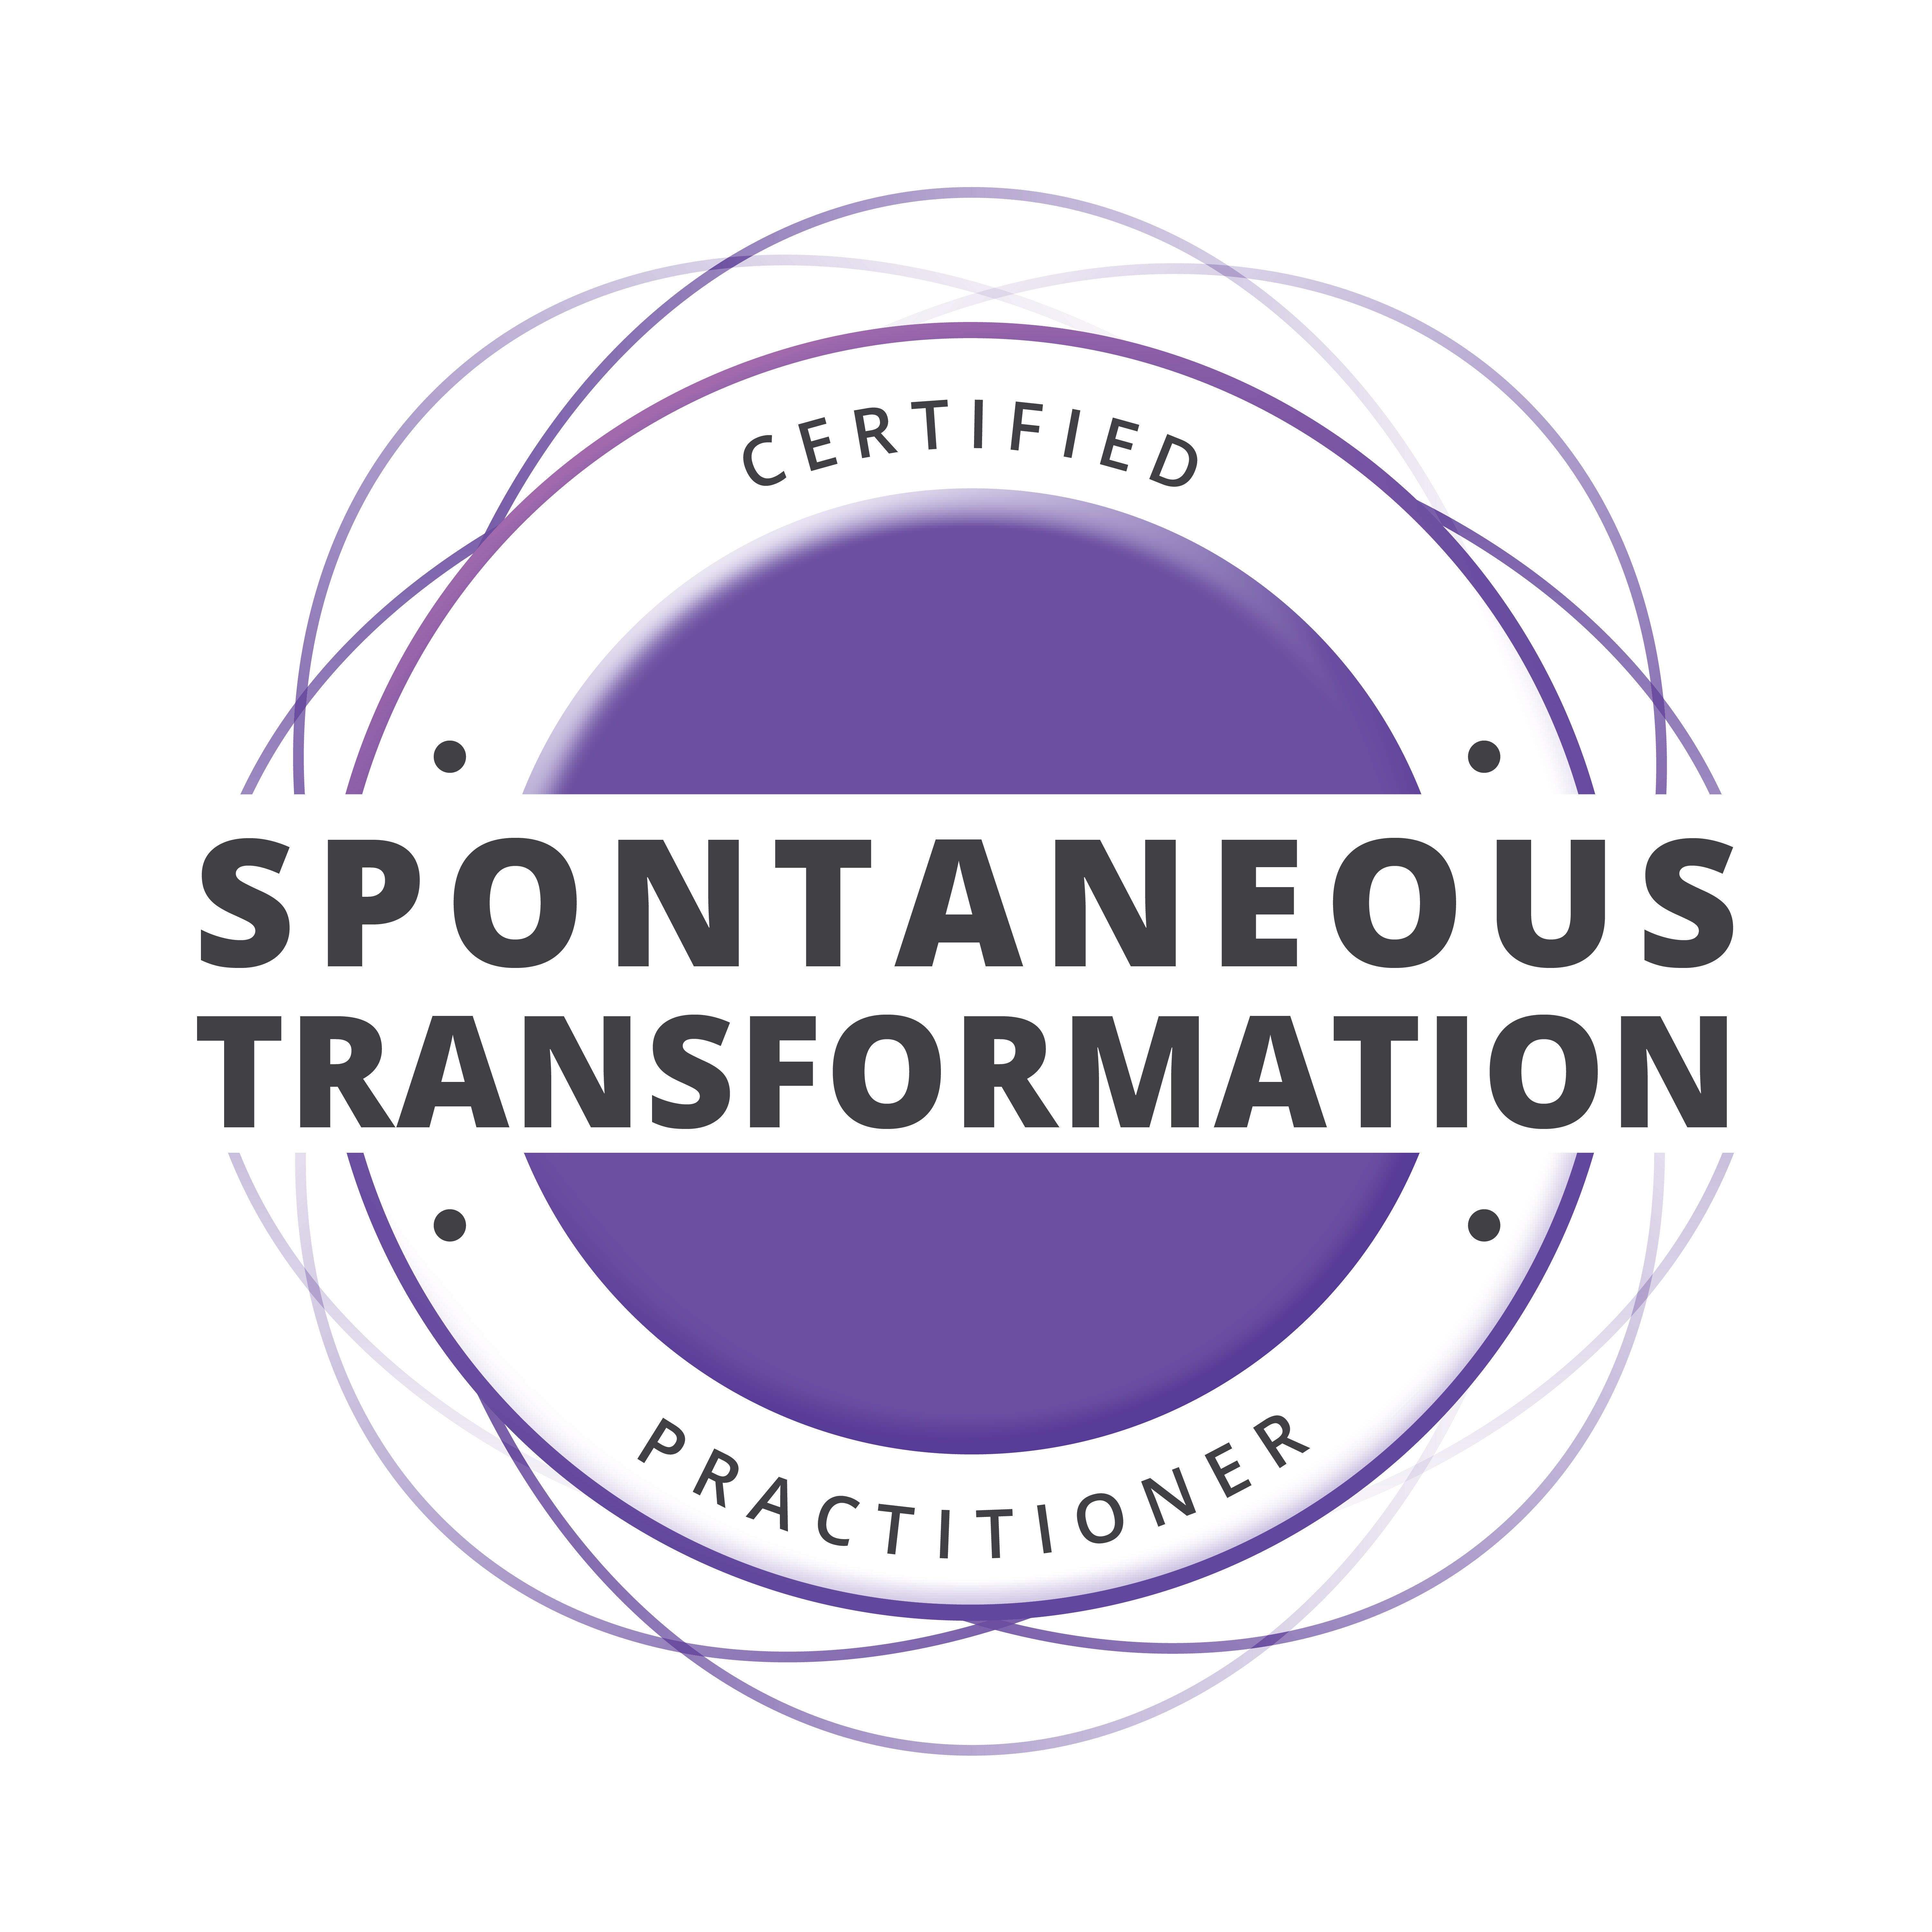 Spontaneous Transformation Certified Practitioner